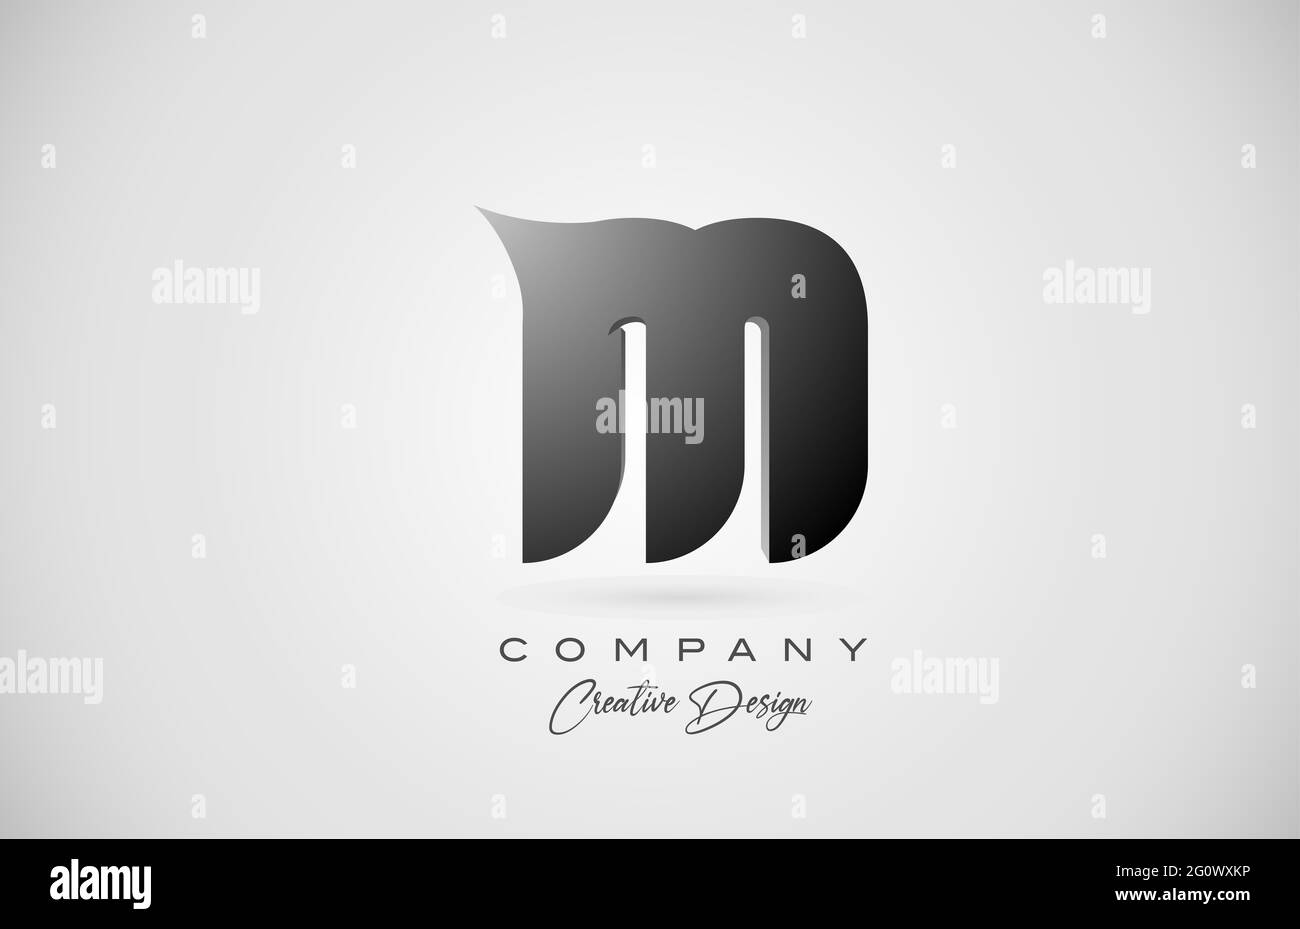 Mm Monogram Projects  Photos, videos, logos, illustrations and